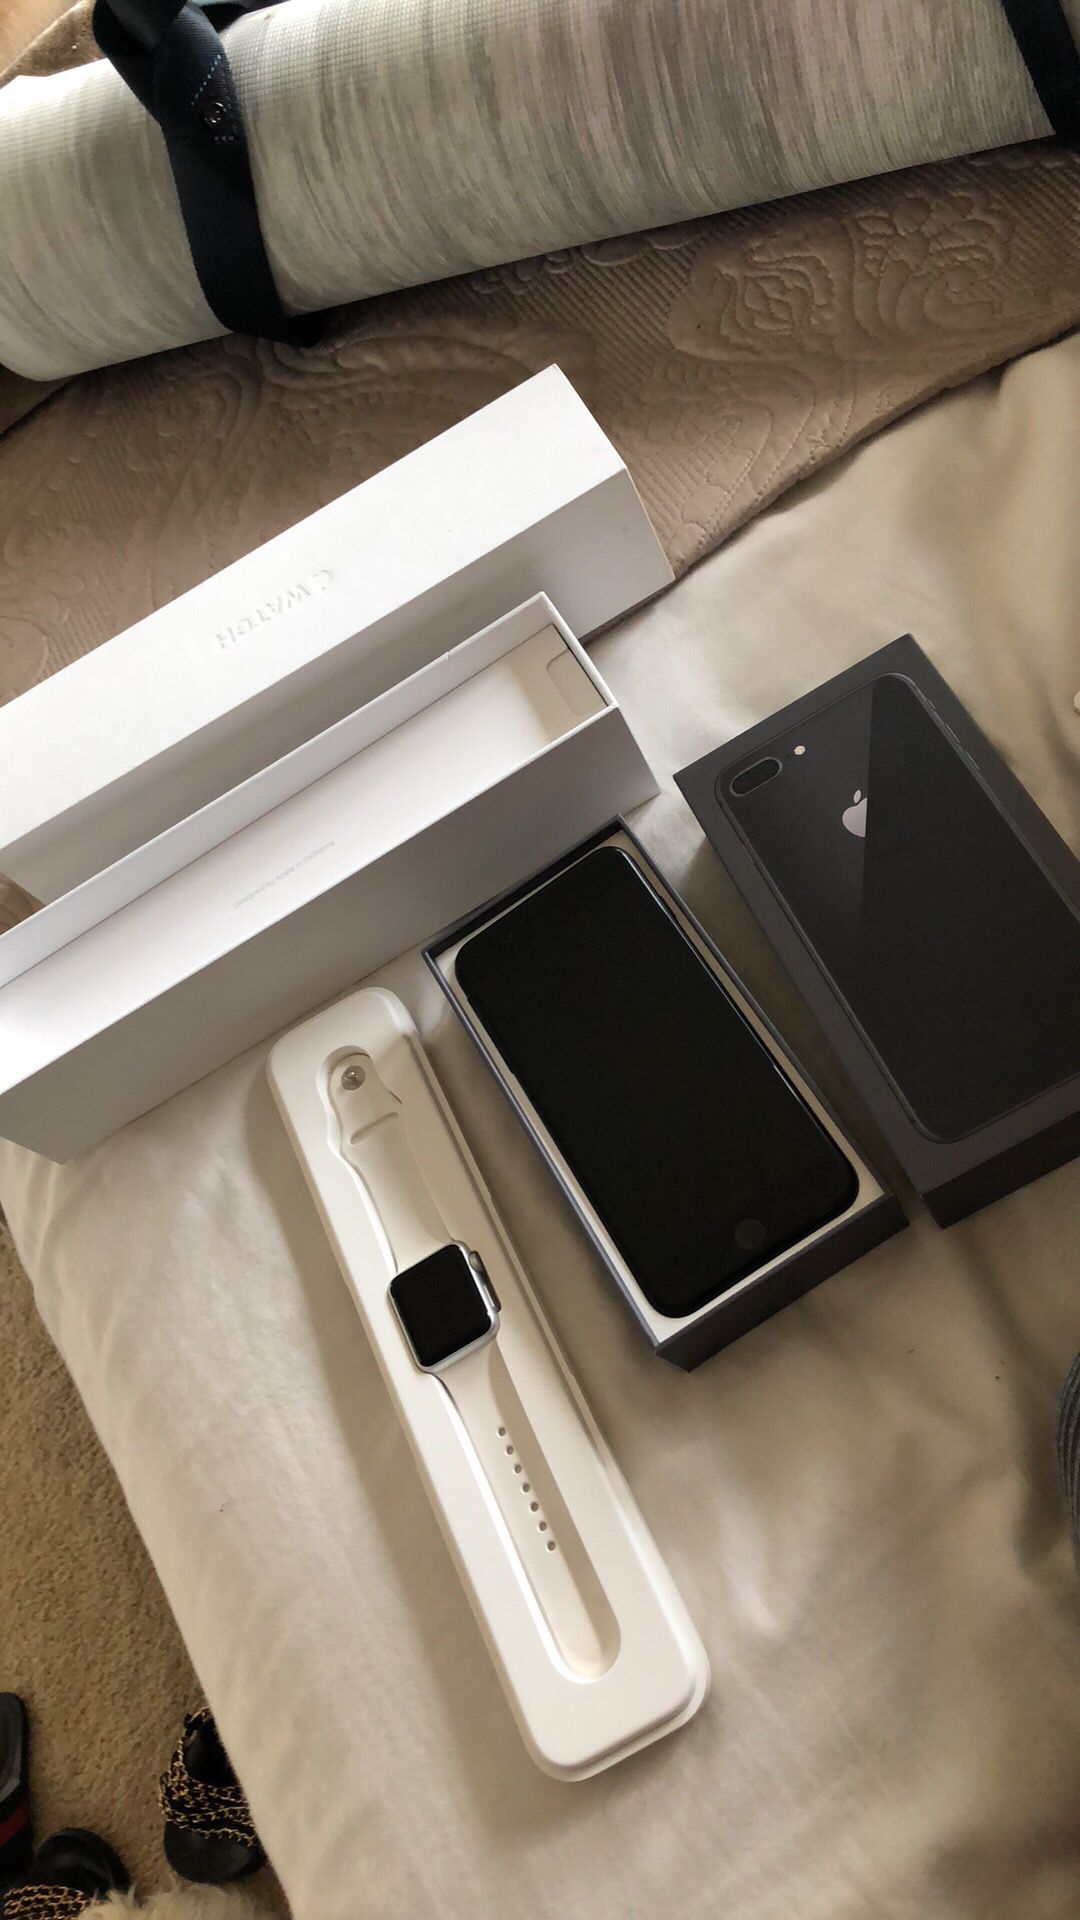 Apple Watch and Iphone 7plus 128gb